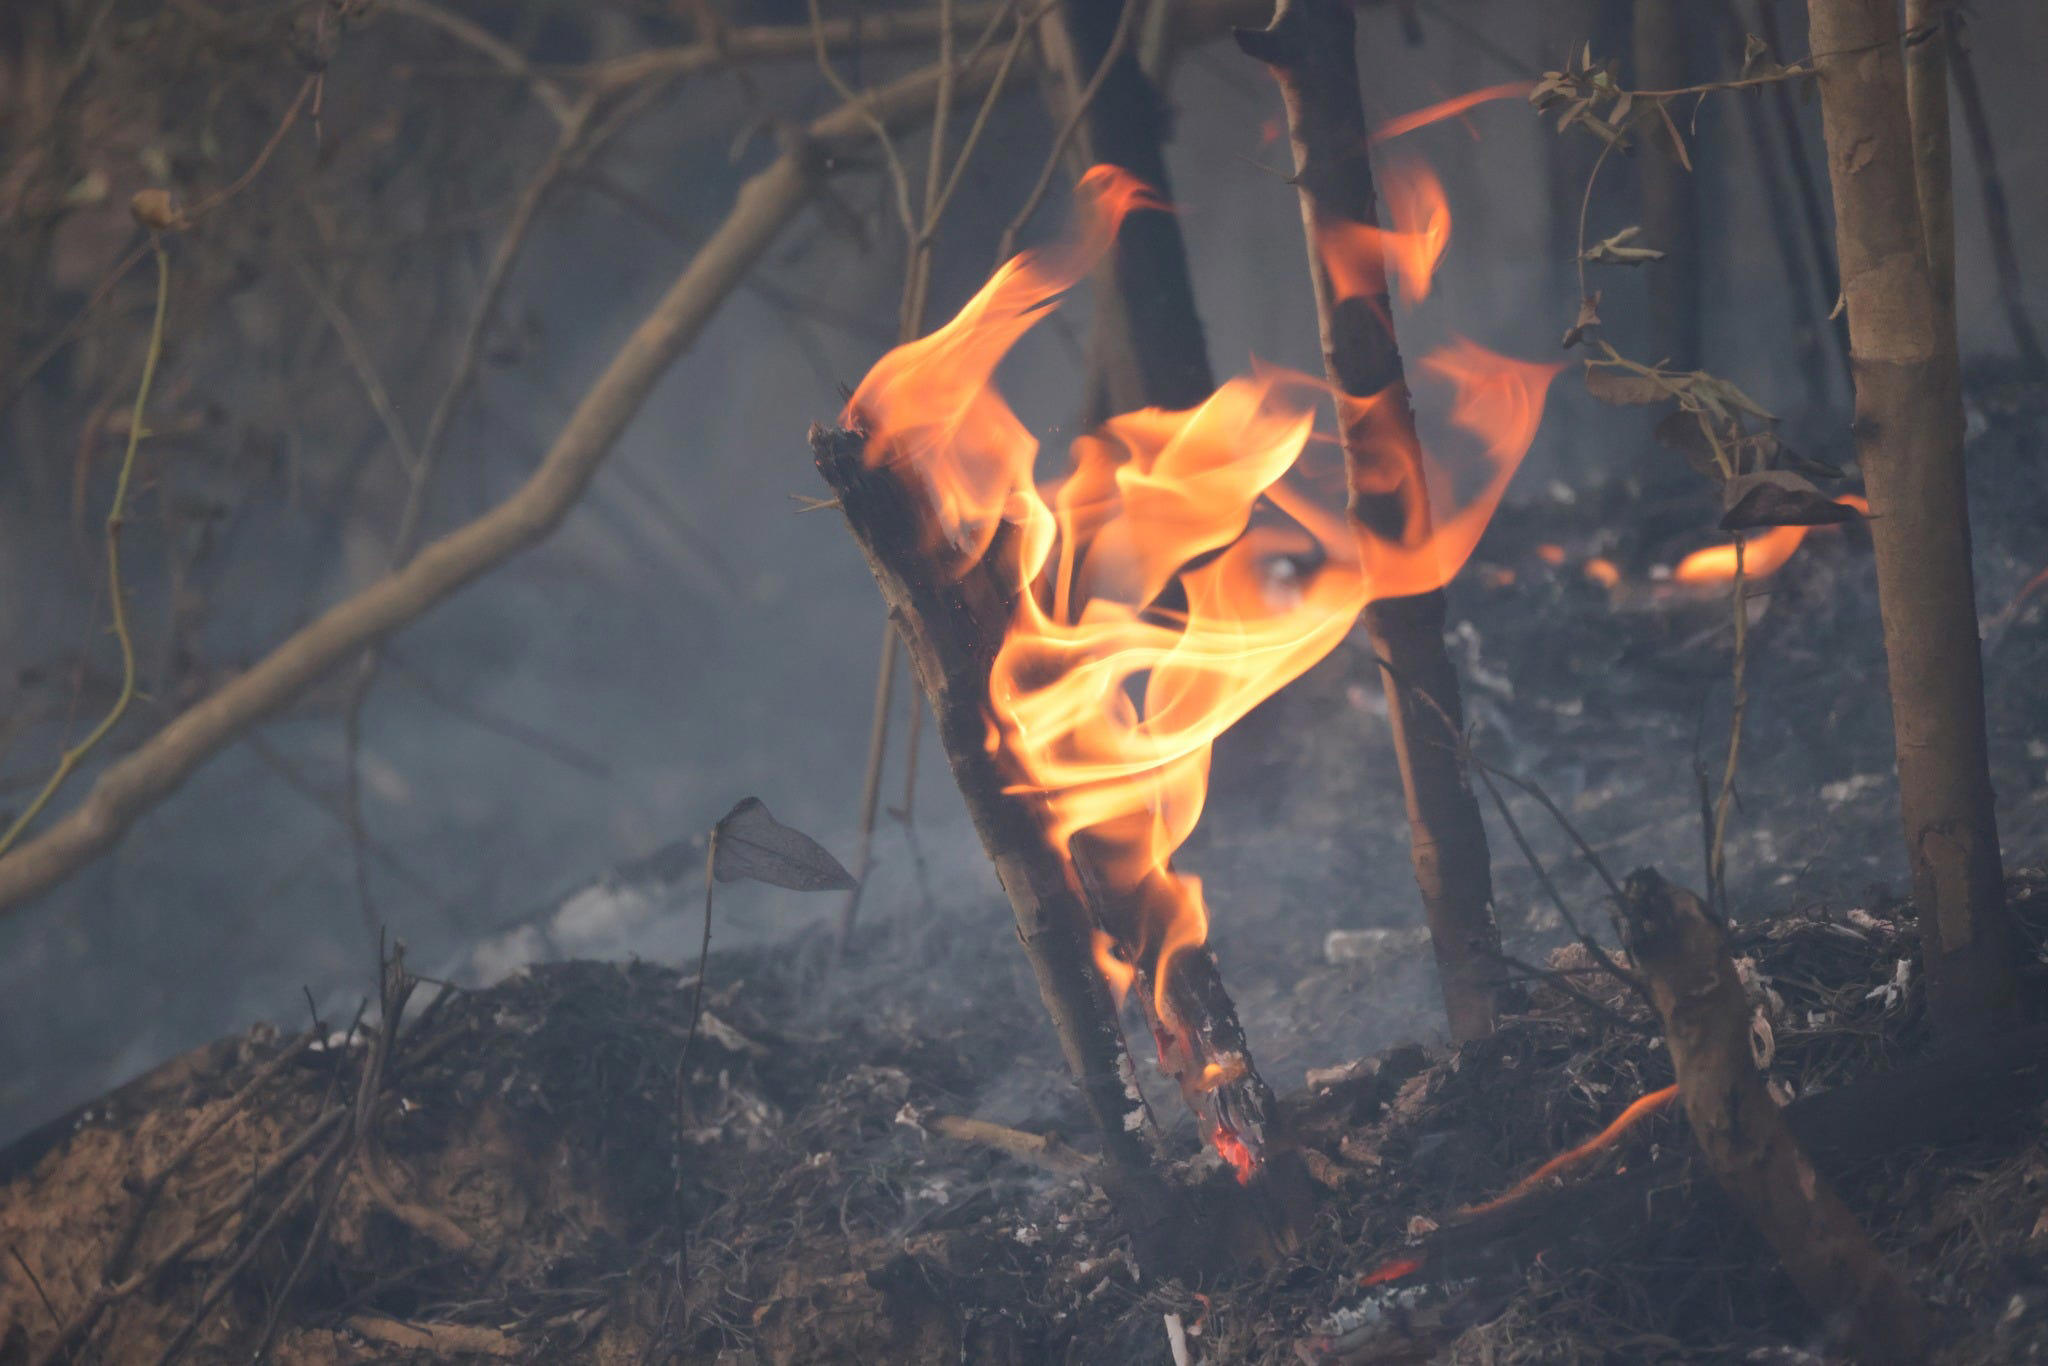 Burn ban extended as Louisiana continues to smolder The latest on